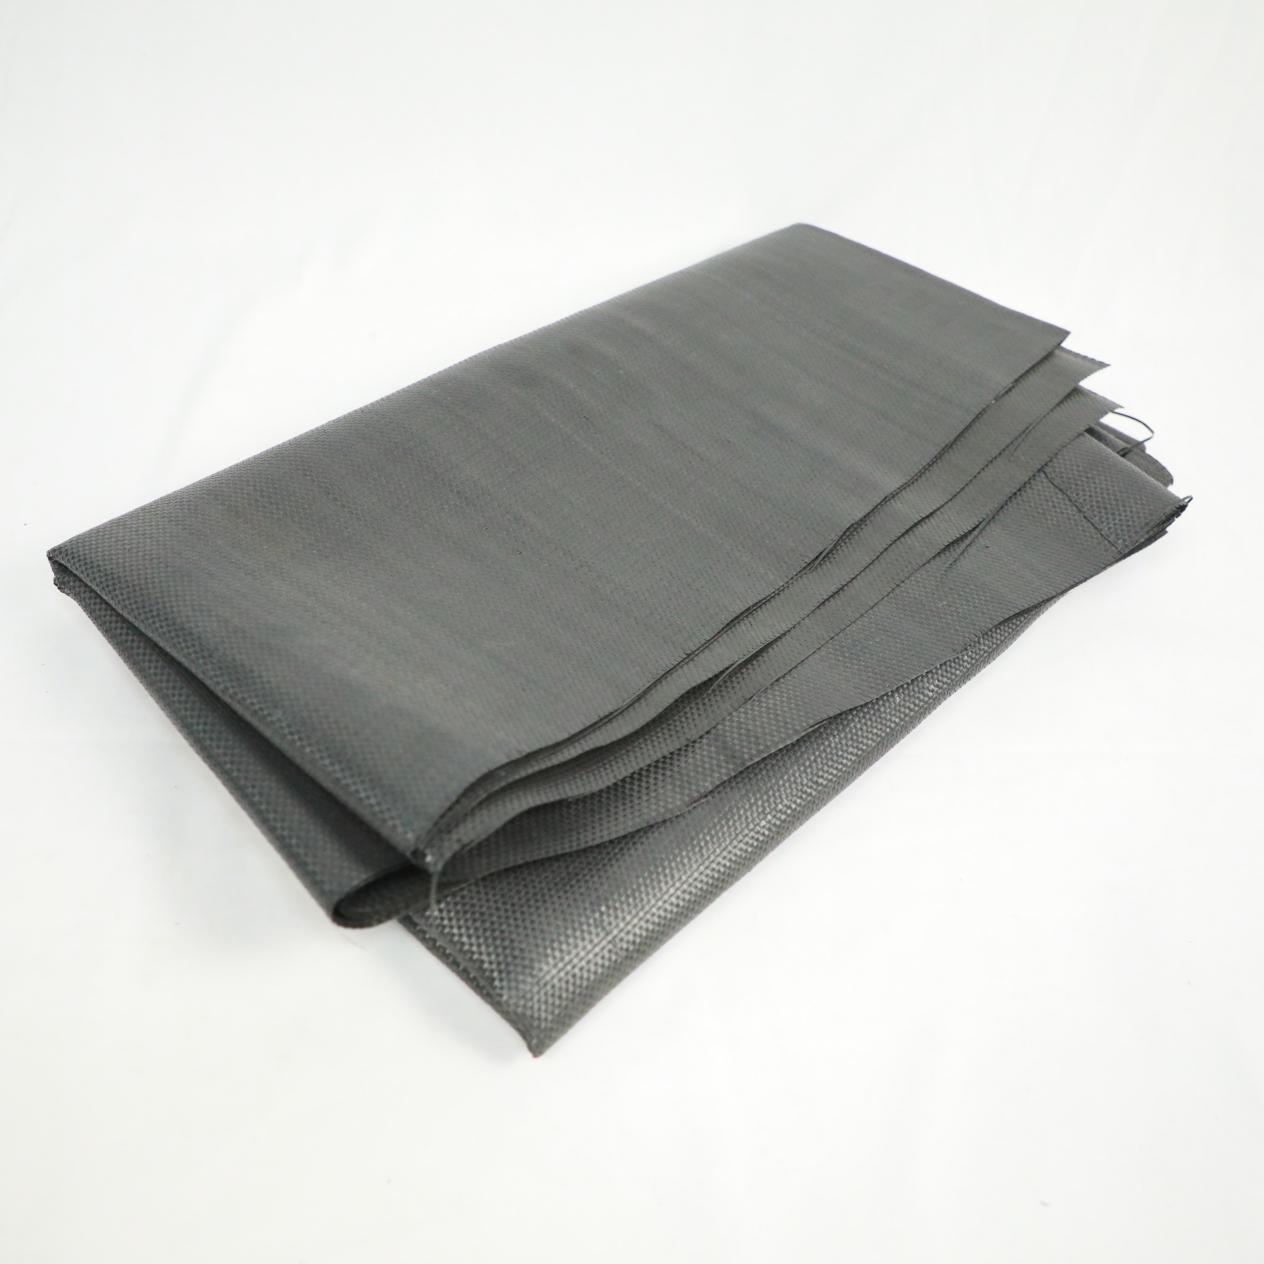 PP PET Woven Geotextile Fabric Price